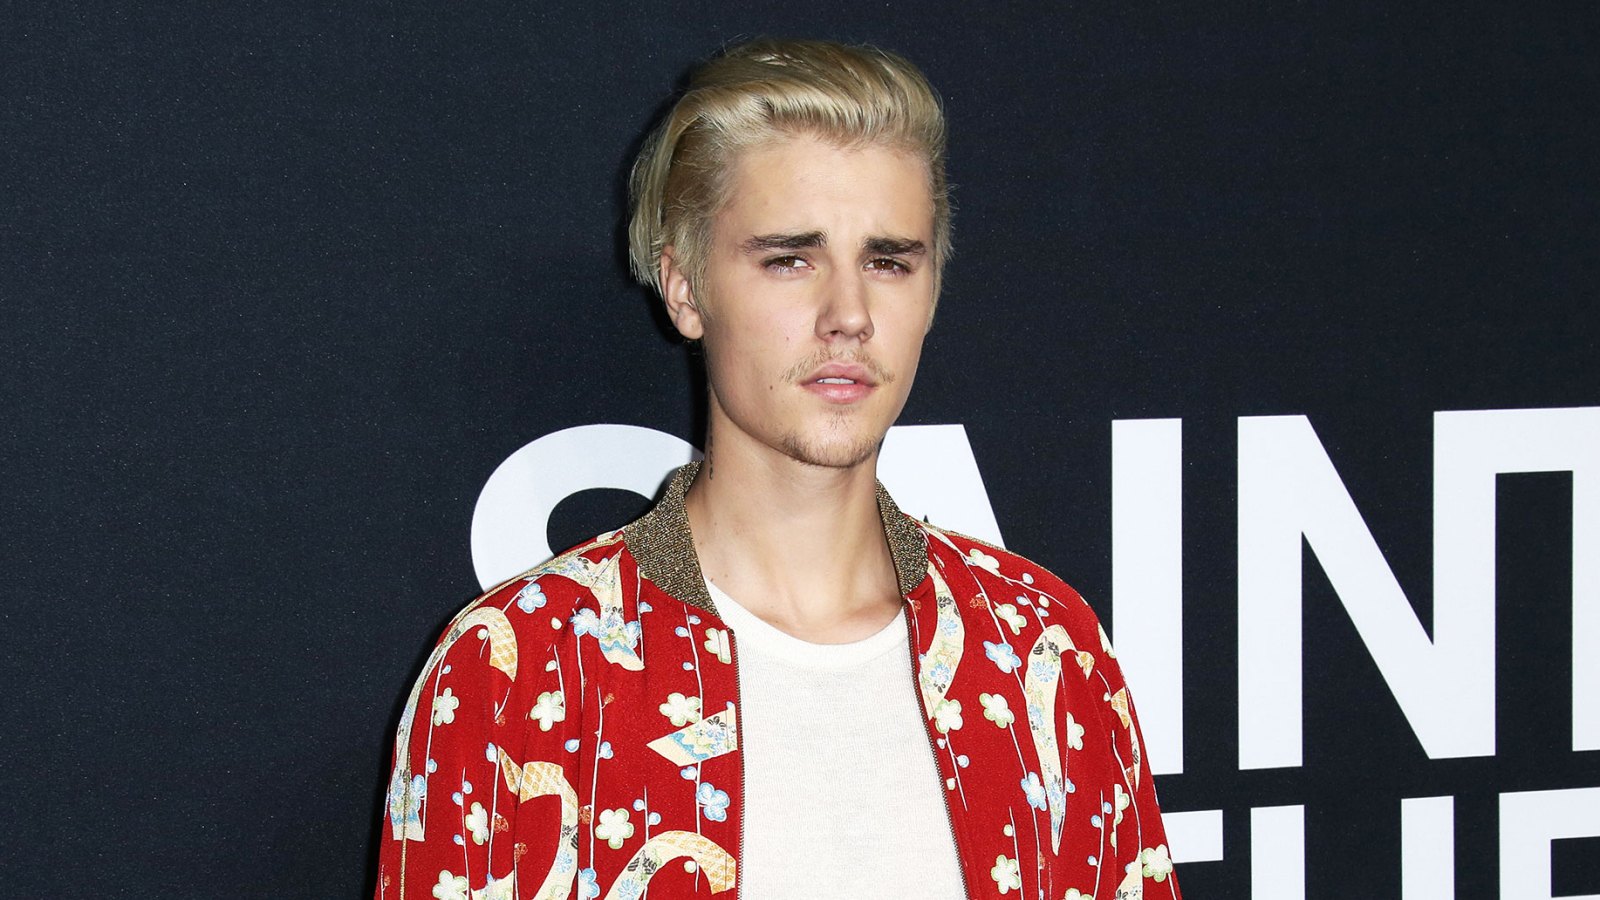 Justin Bieber at Saint Laurent Justin Bieber Says He Shouldnt Be Alive While Holding Back Tears at Album Listening Party